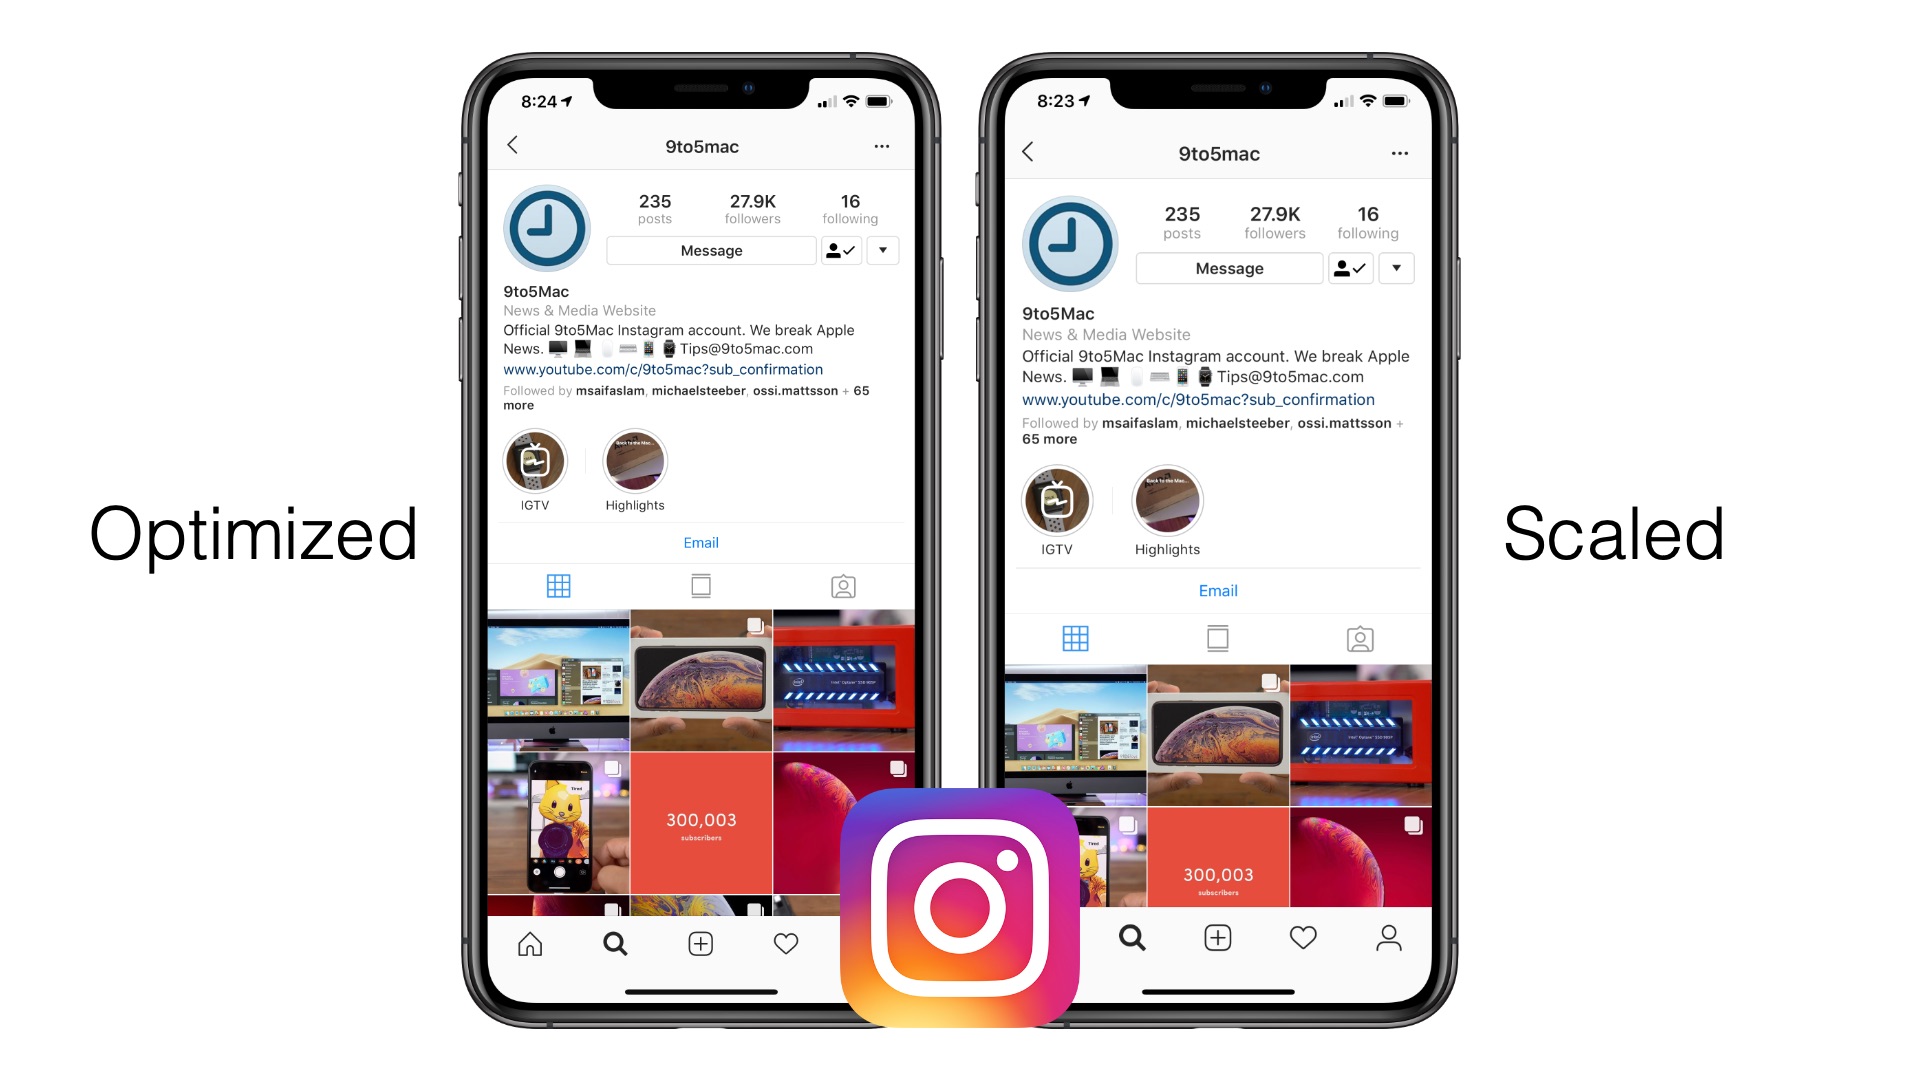 apps to download instagram videos on iphone